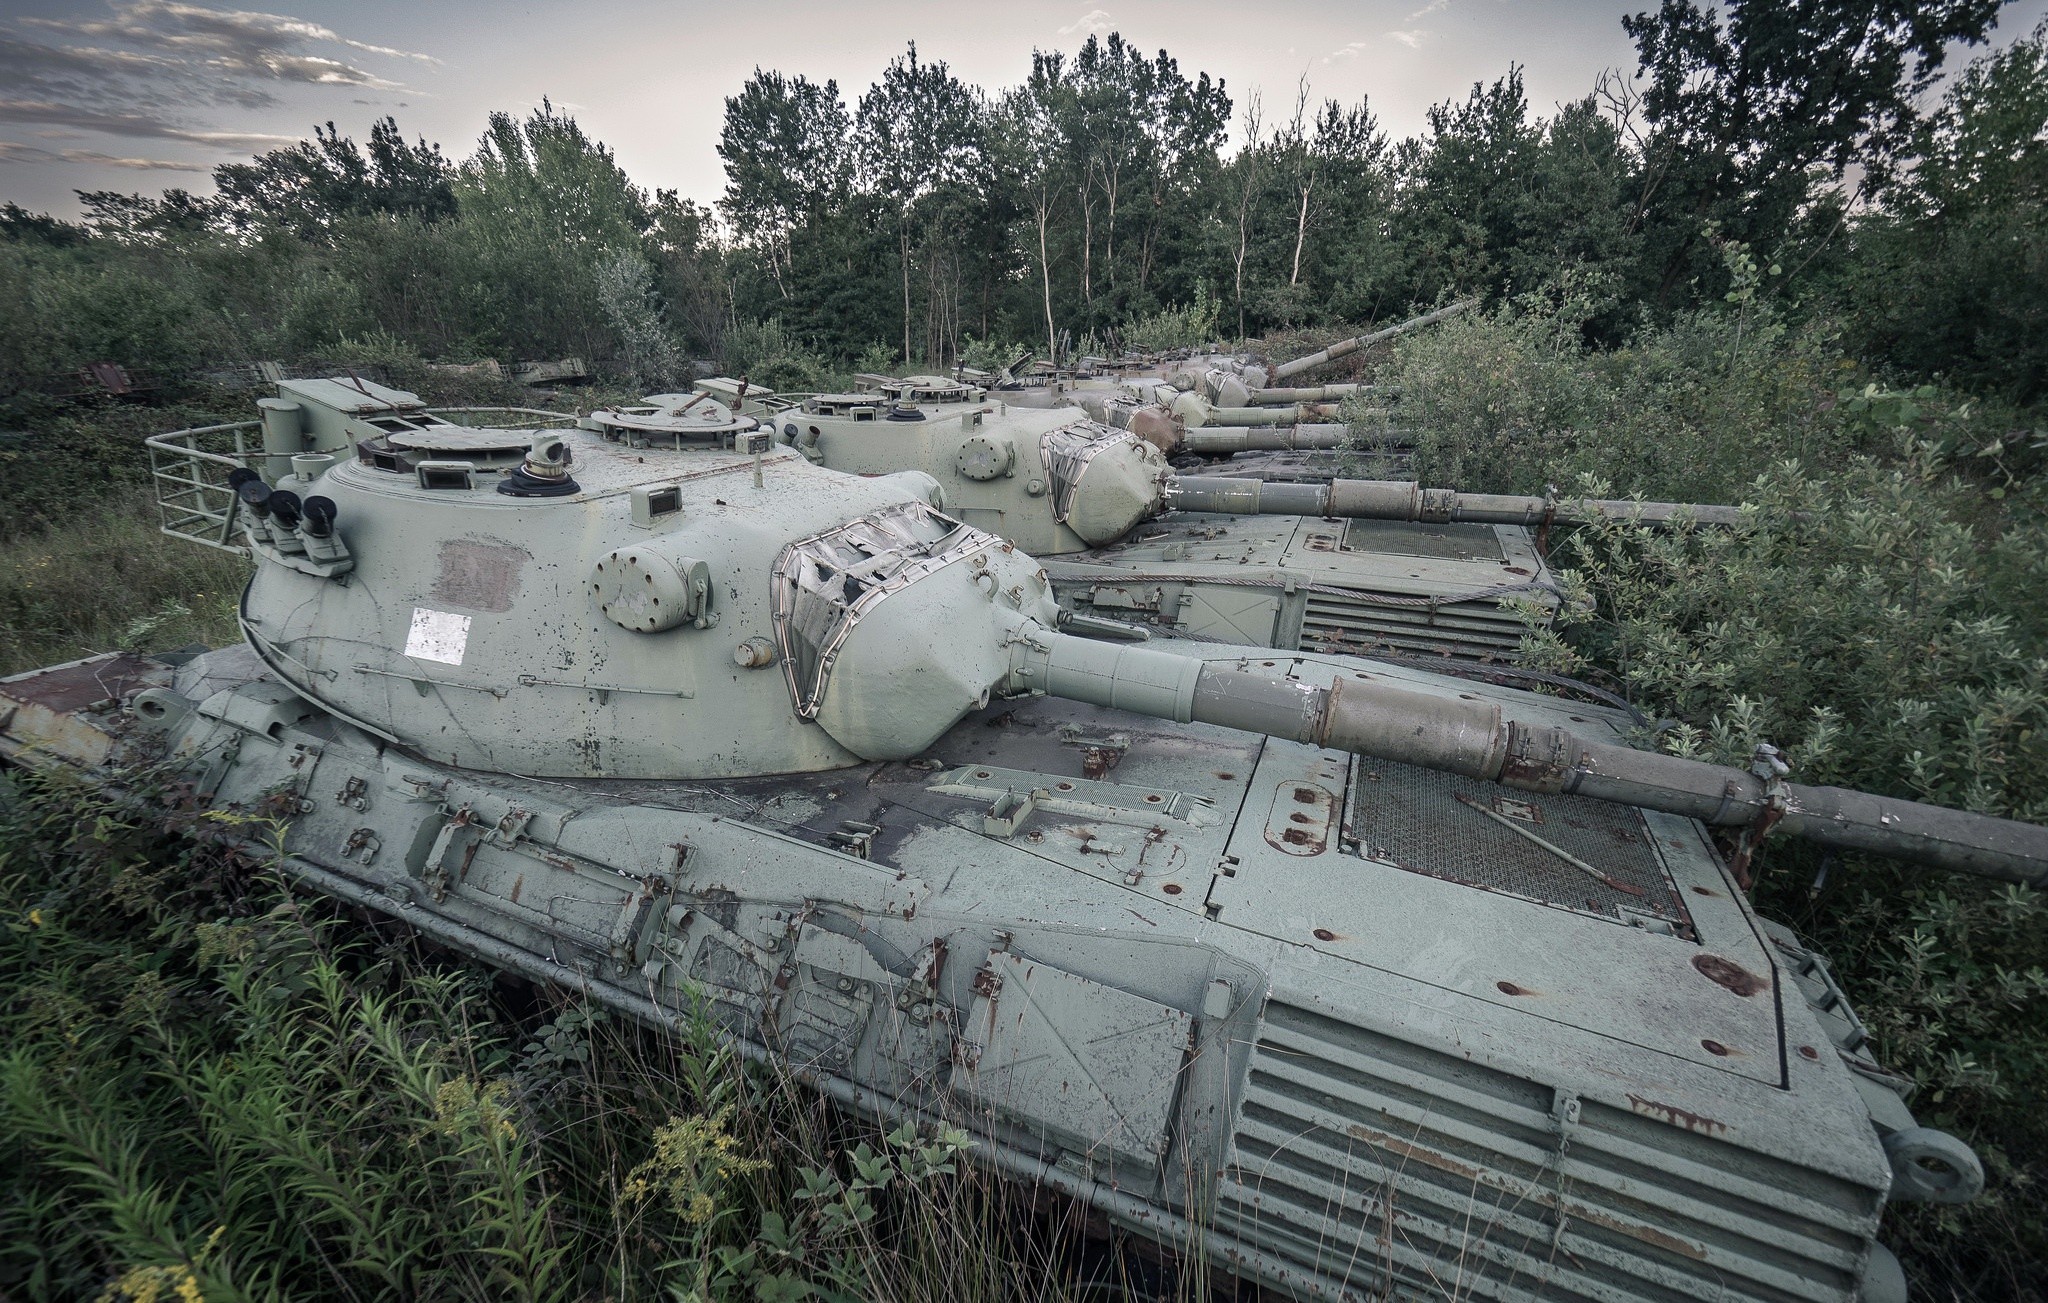 General 2048x1303 wreck vehicle tank Leopard 1 military German tanks trees leaves side view plants clouds sky